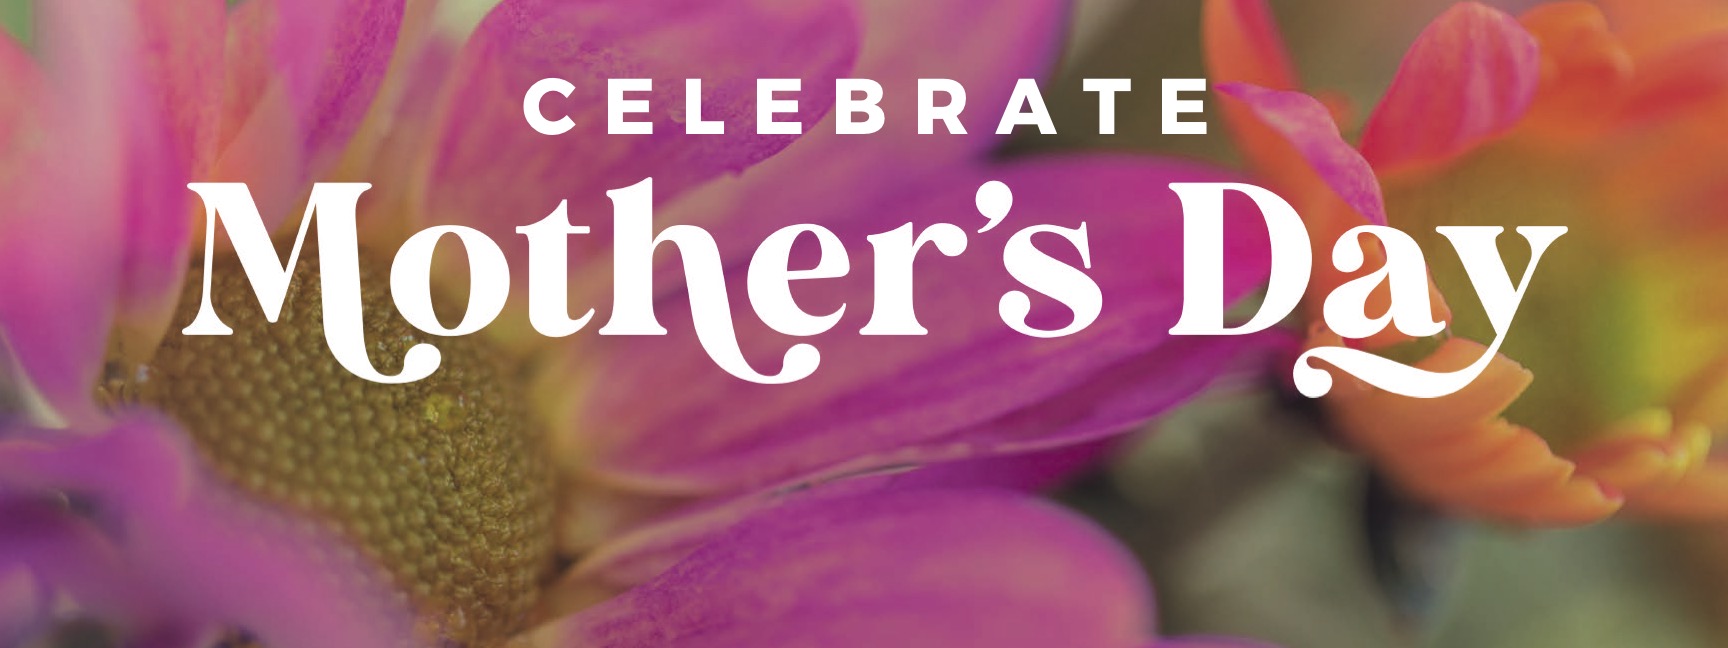 Outreach Mother's Day image- wide.jpg